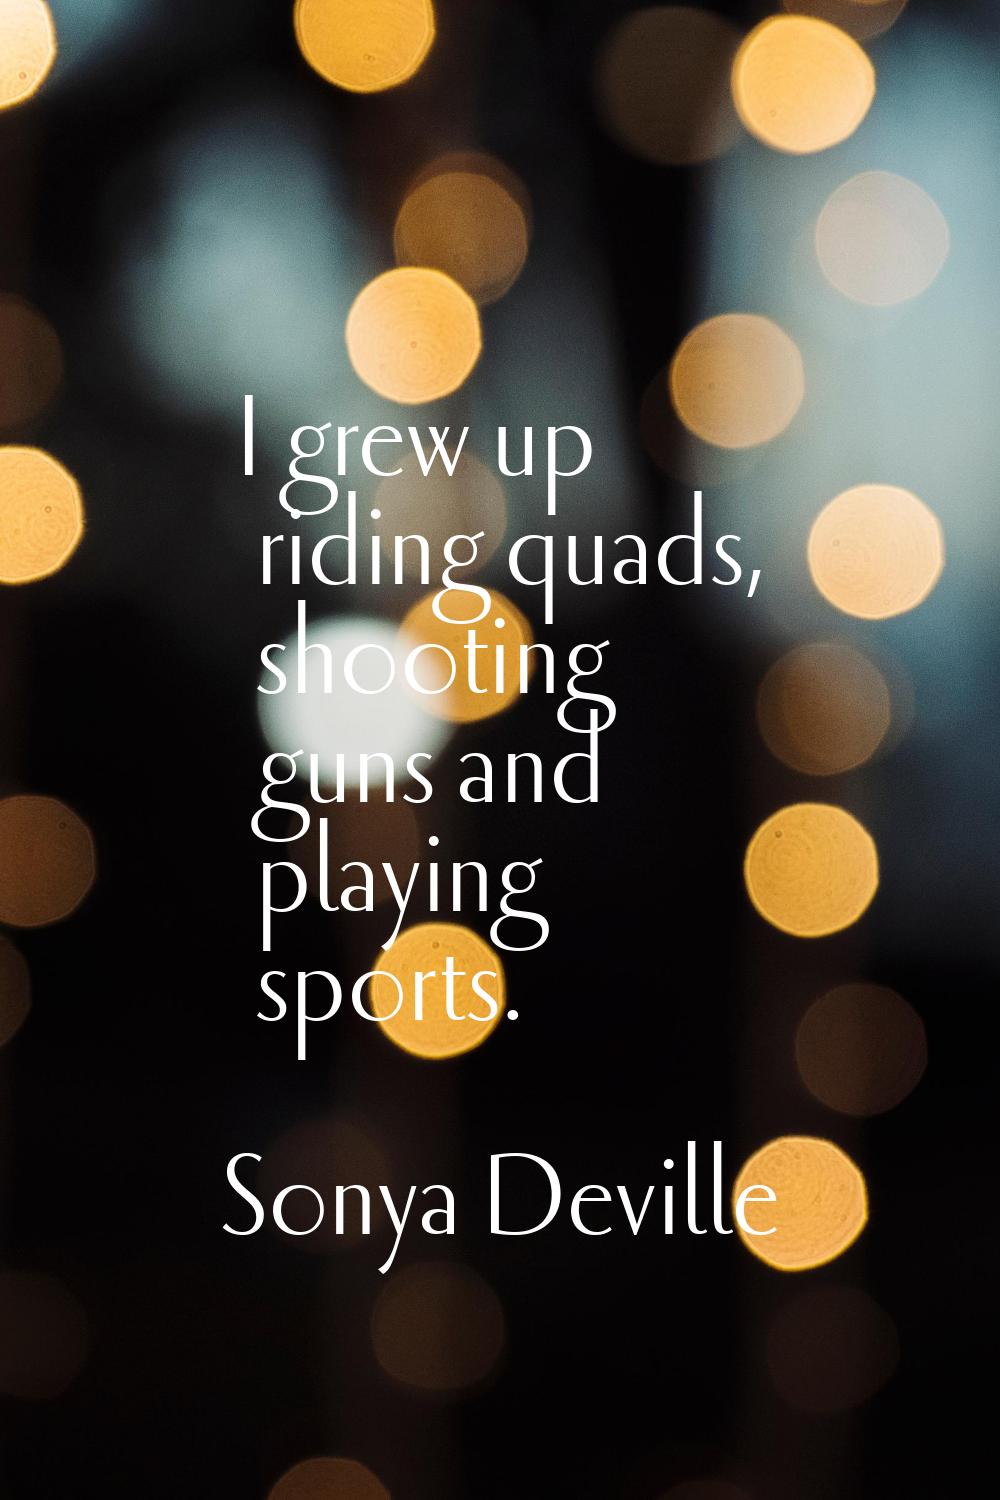 I grew up riding quads, shooting guns and playing sports.